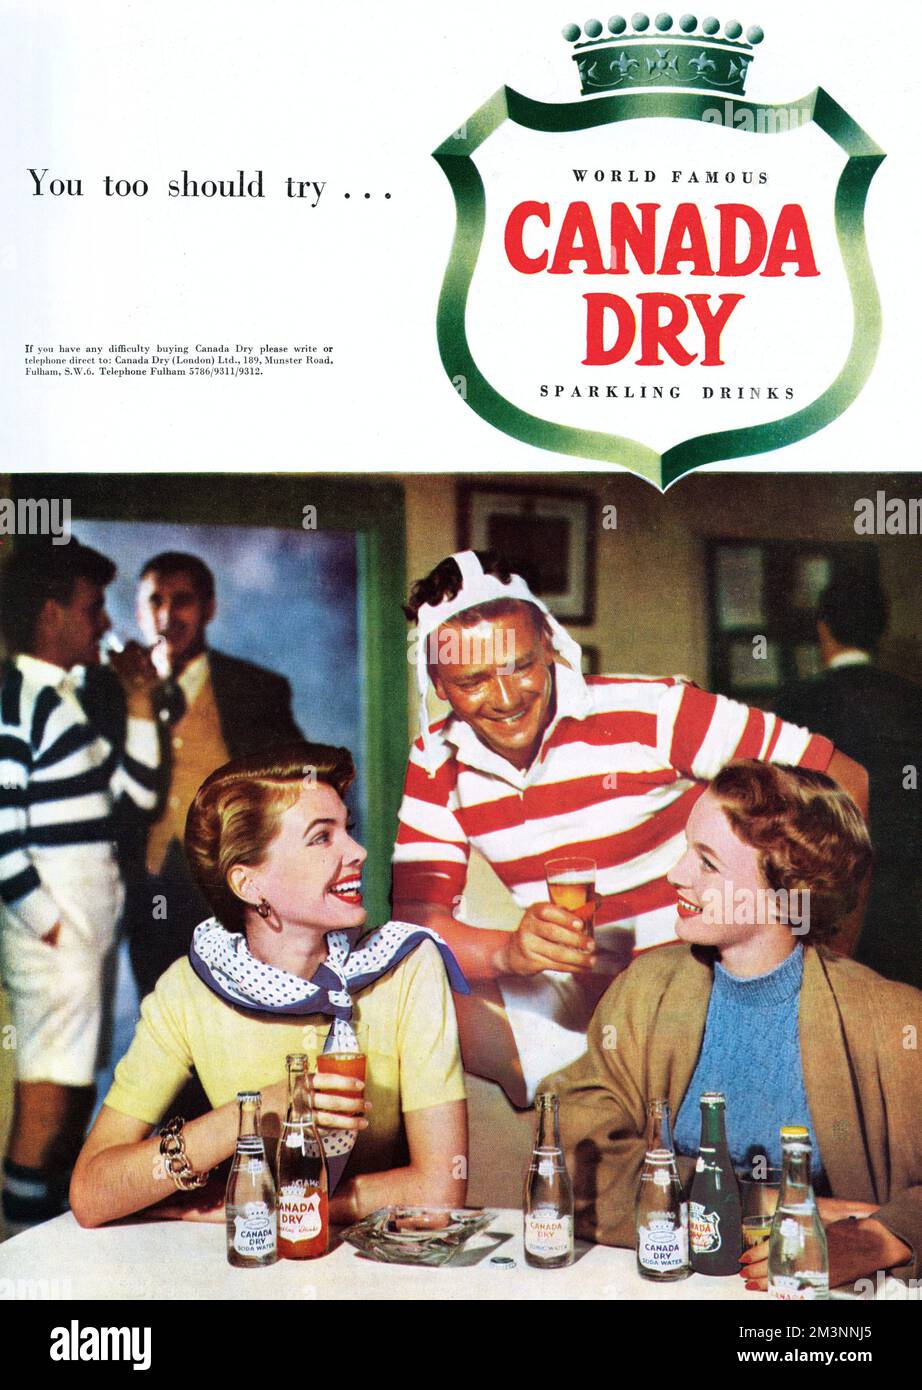 Mildly humorous advertisement for Canada Dry sparkling drinks featuring a photograph of two glamorous young women being flirted with by a sweaty rugby player after a game.     Date: 1953 Stock Photo